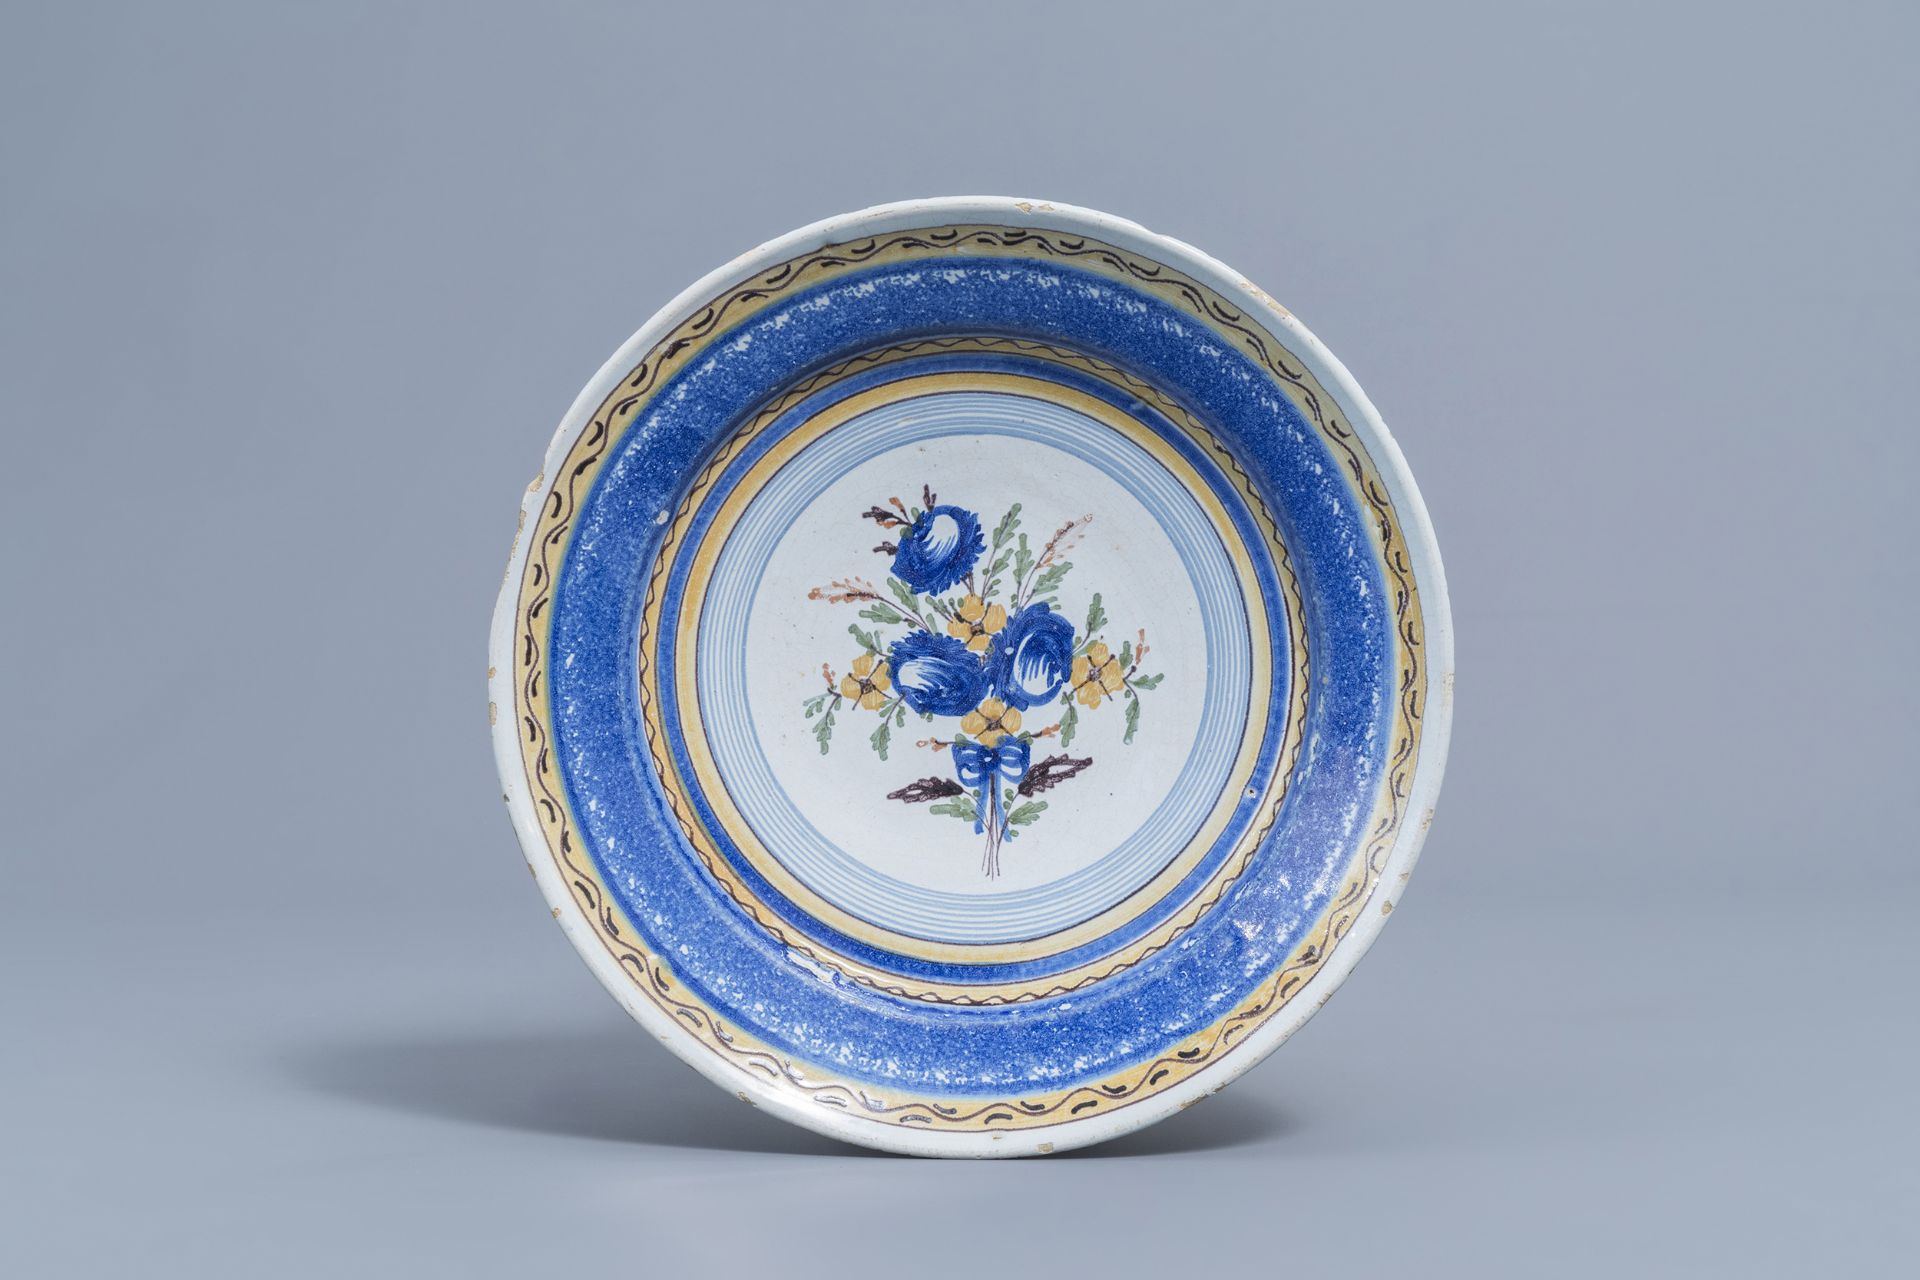 Five polychrome Brussels faience plates with floral design, 18th/19th C. - Image 10 of 12